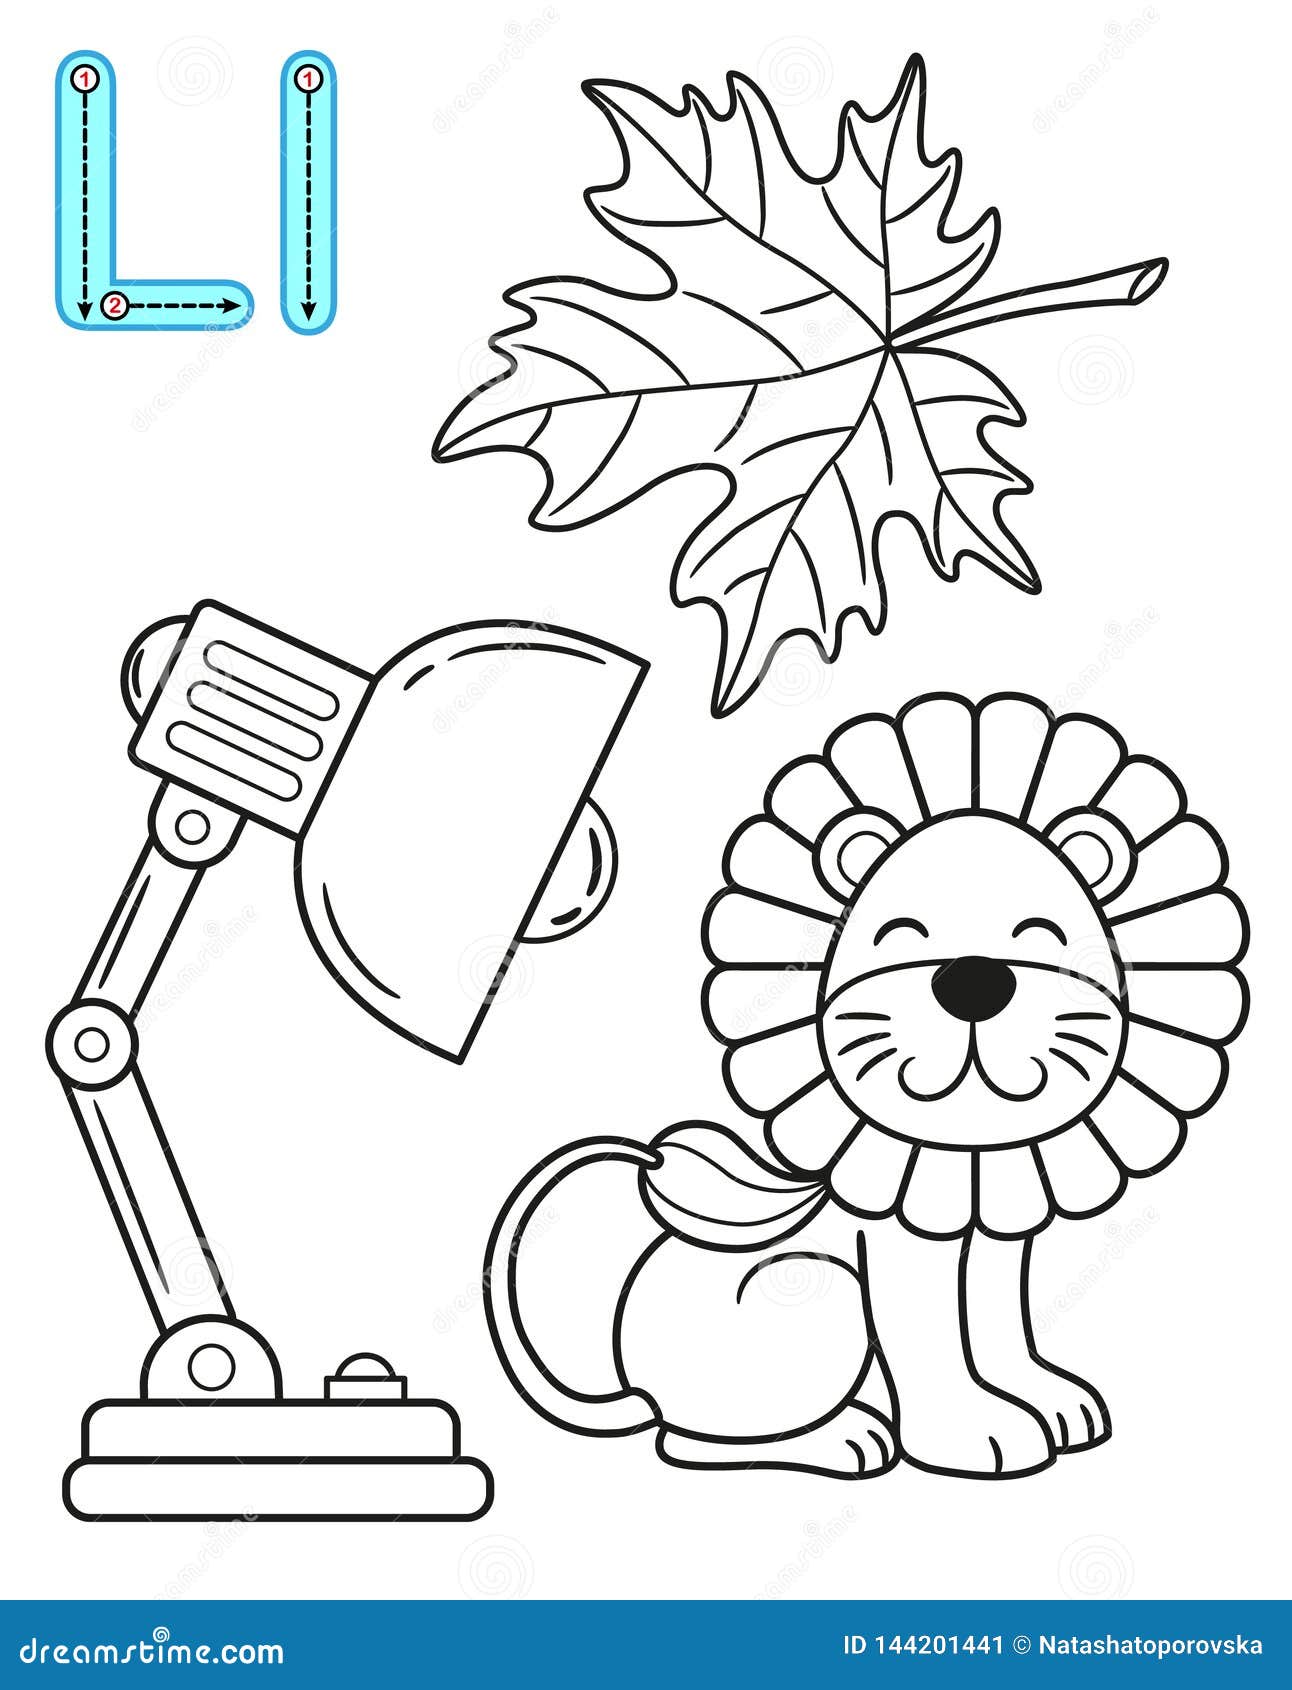 Printable coloring page for kindergarten and preschool card for study english vector coloring book alphabet letter l stock vector